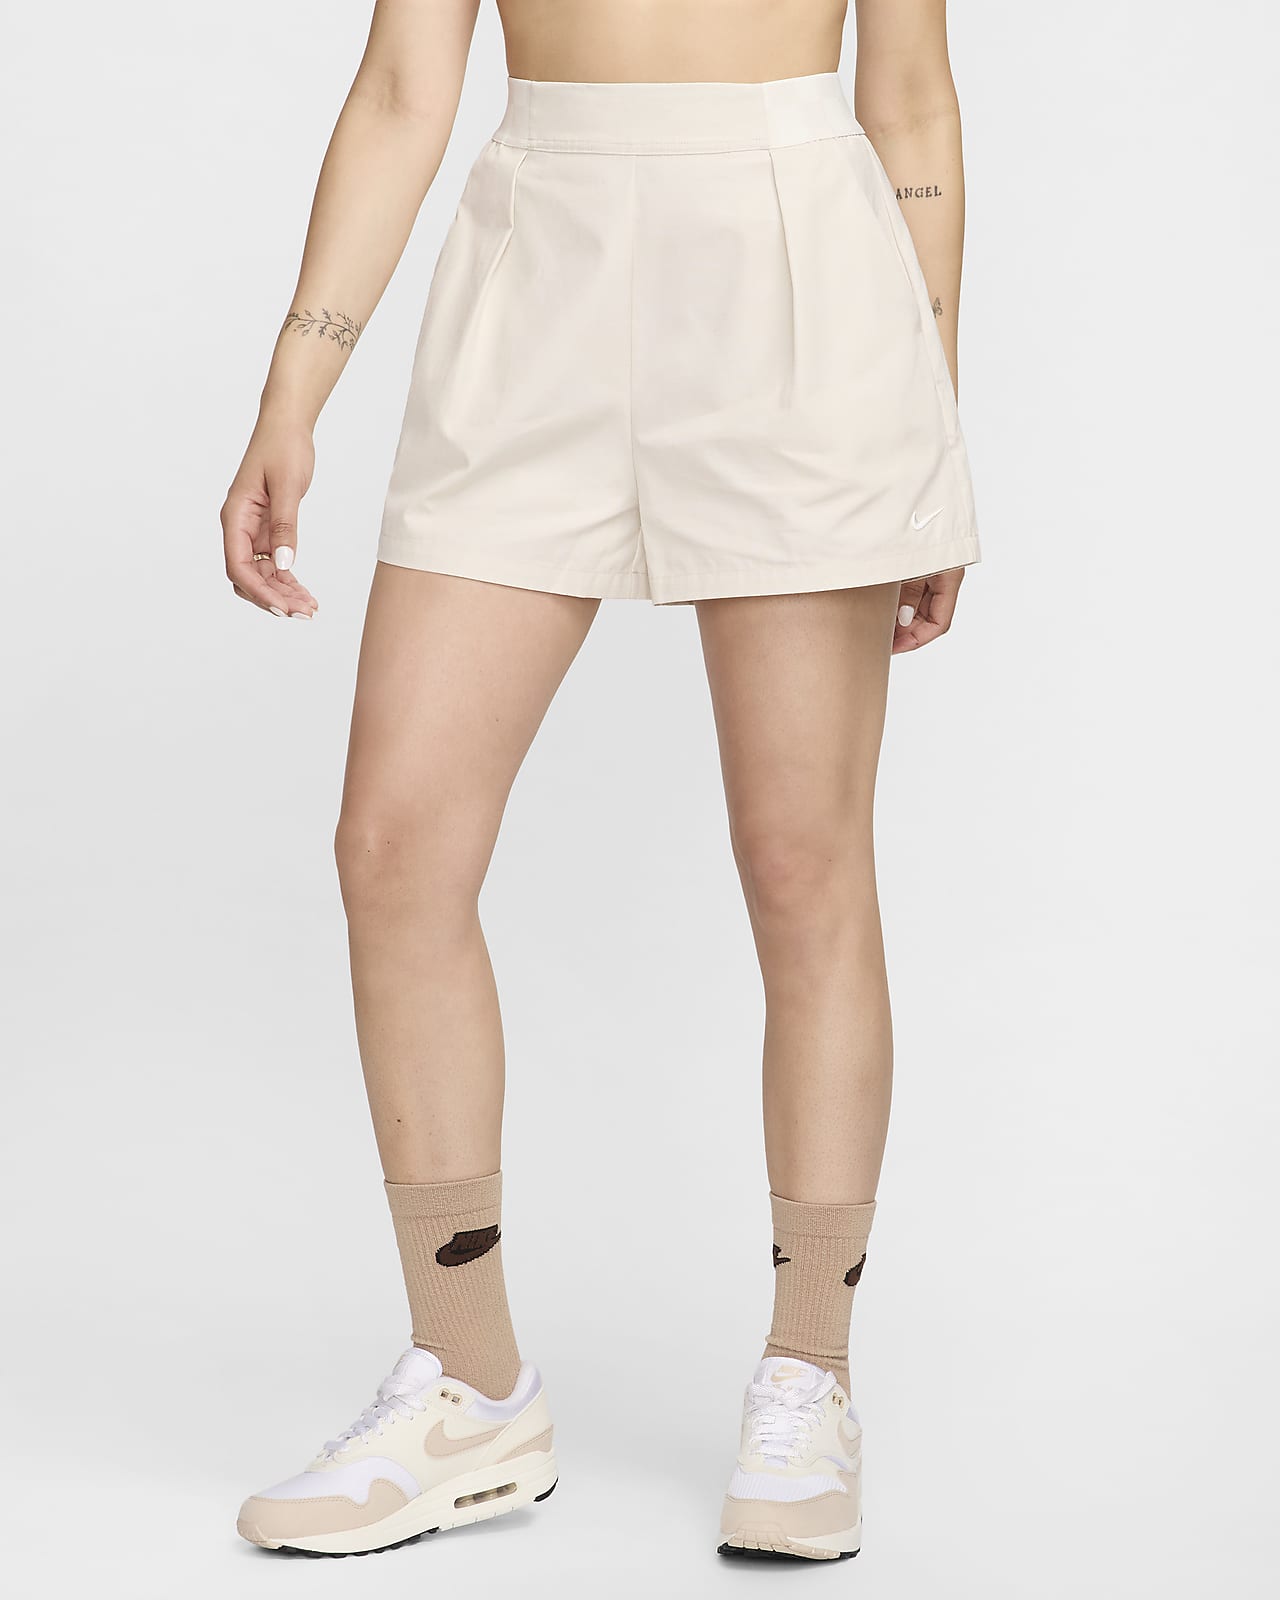 Nike Sportswear Collection Women's High-Waisted 7.5cm (approx.) Trouser Shorts